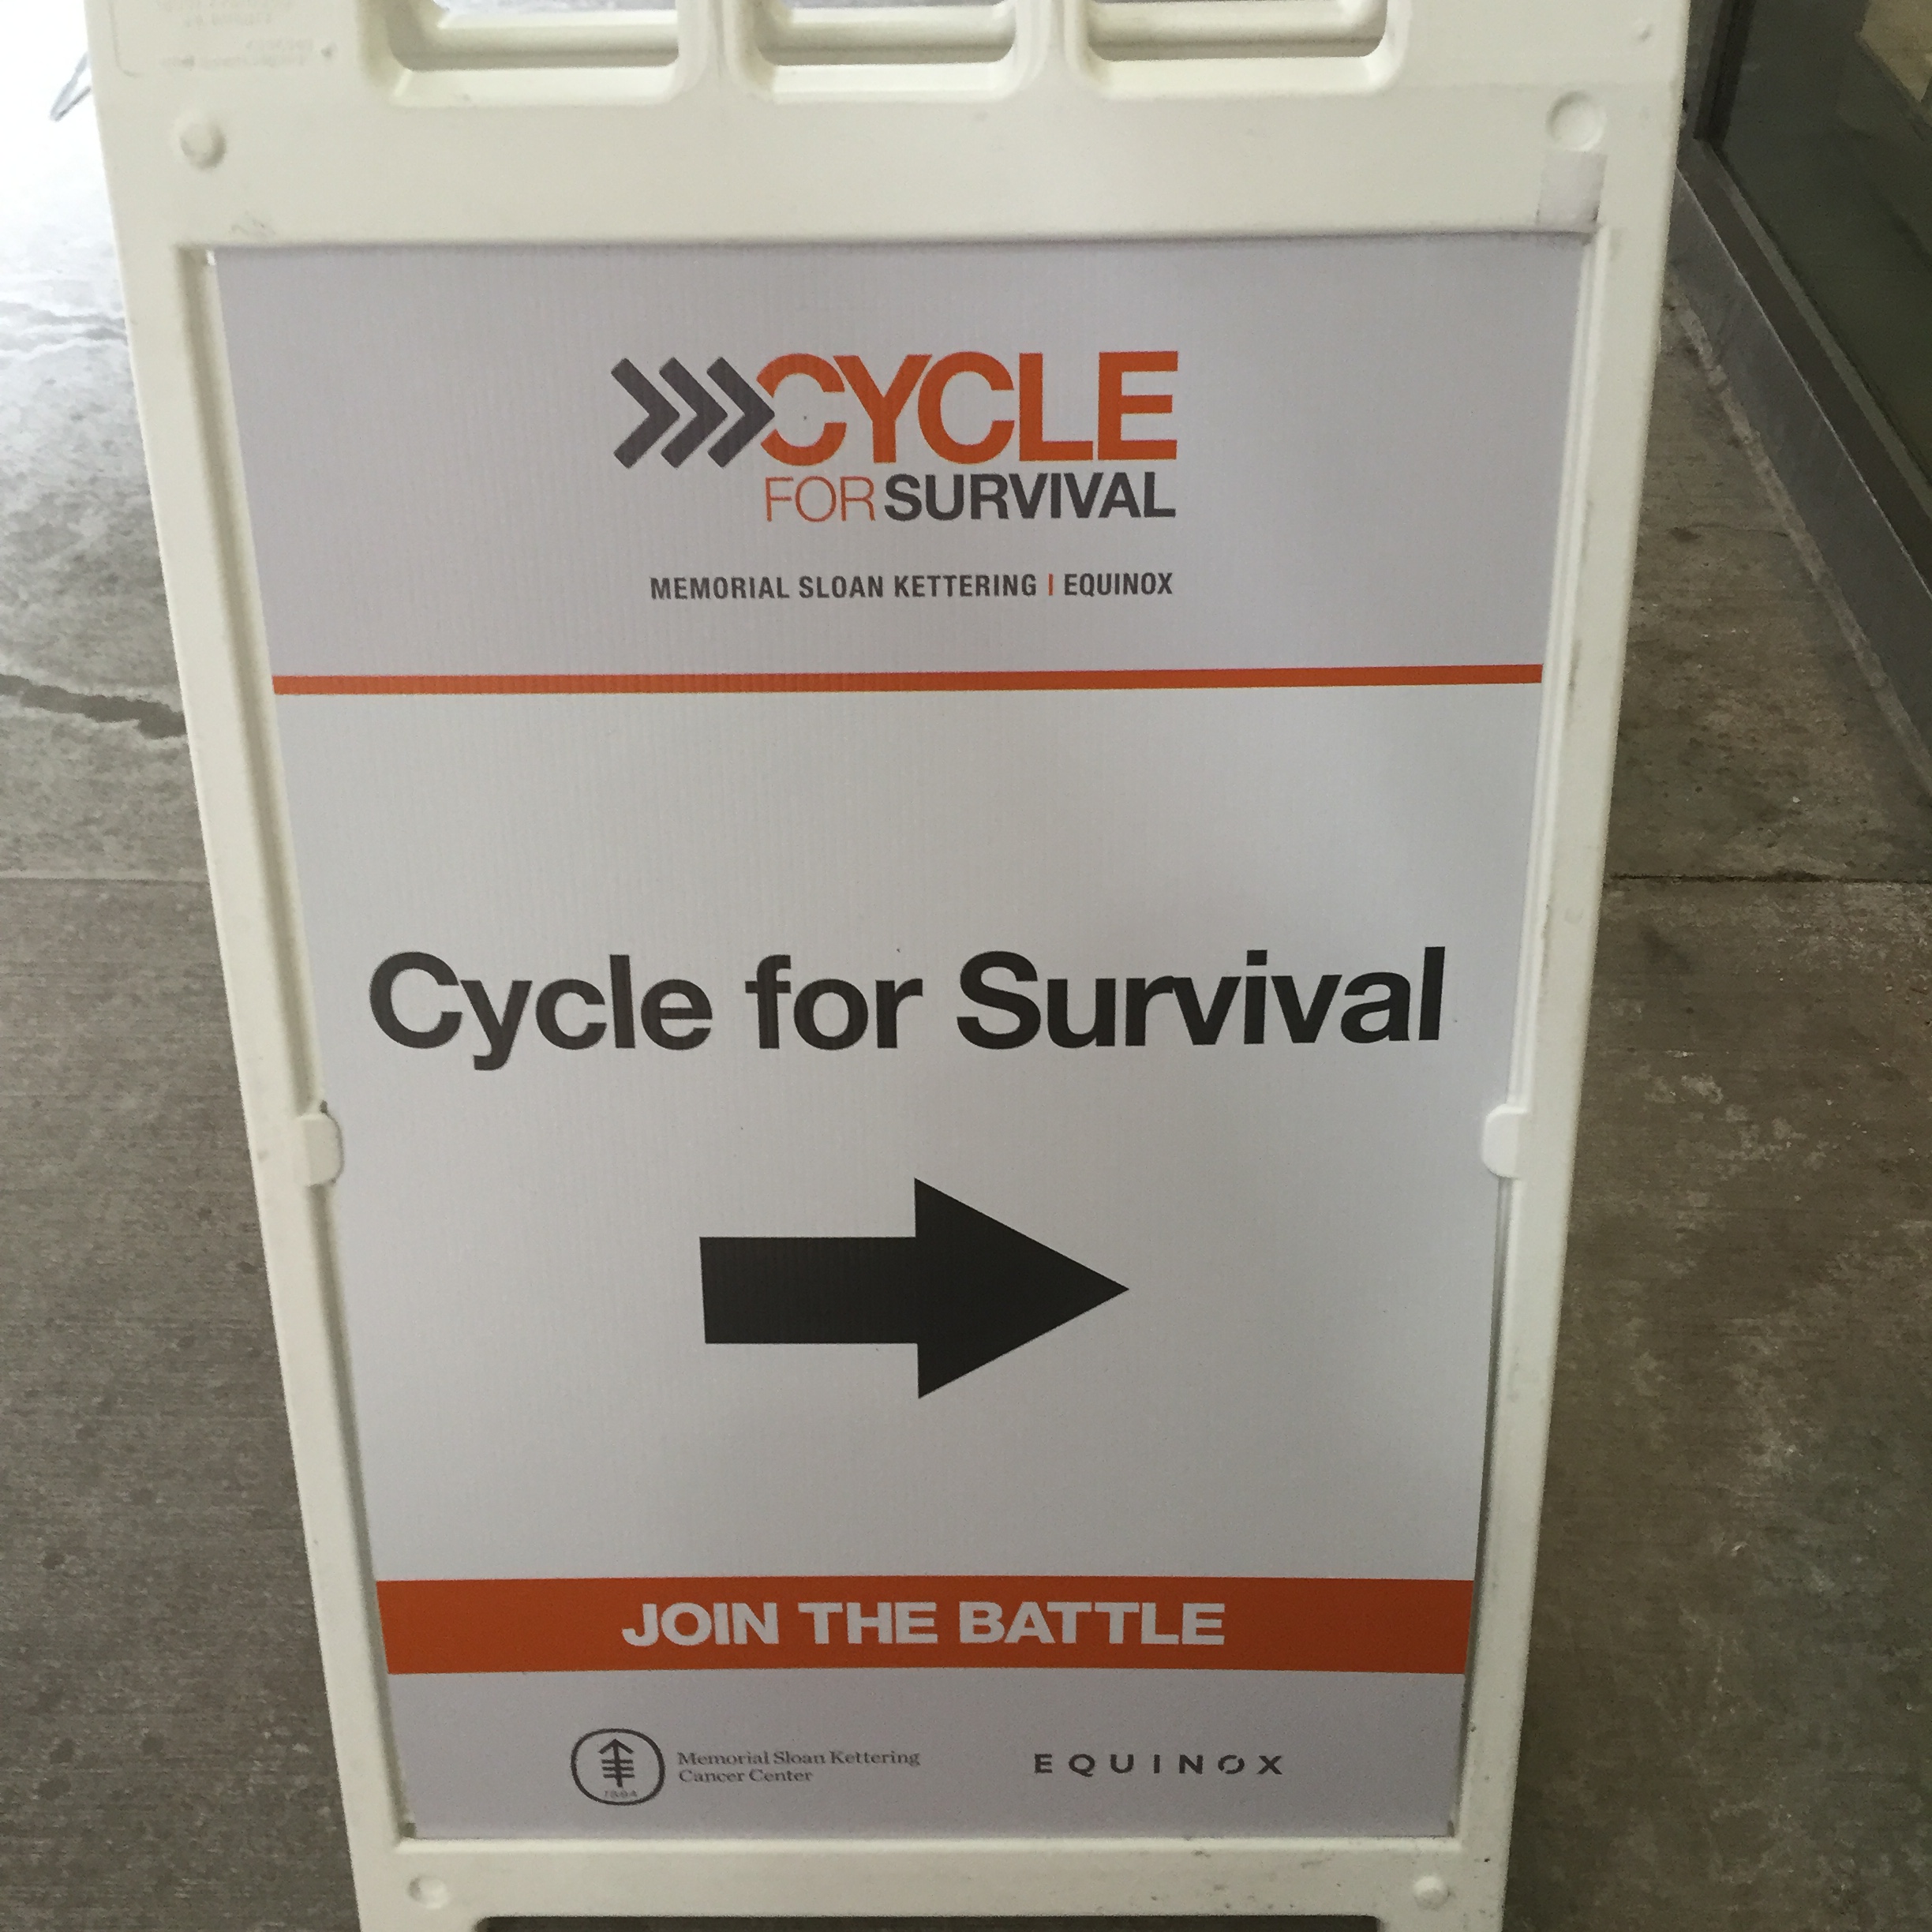 Take Time Tuesday: Another Amazing Cycle for Survival